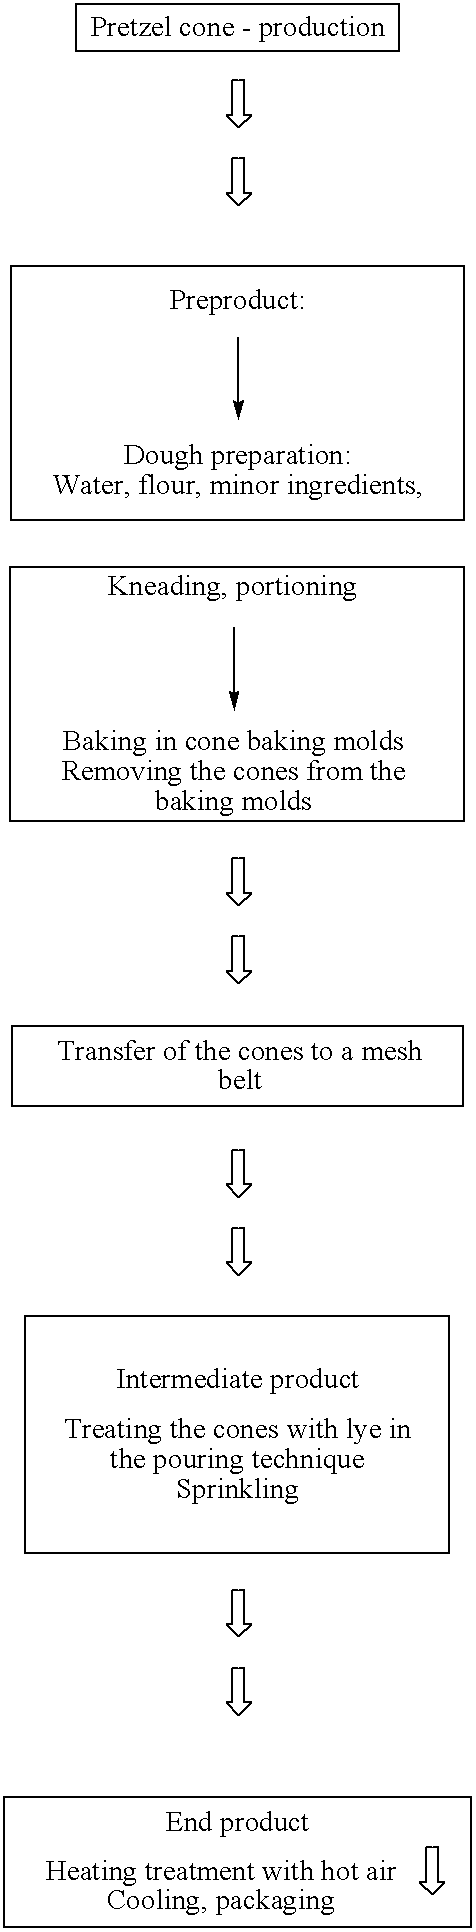 Method for producing baked objects, at least parts of which are a glossy brown